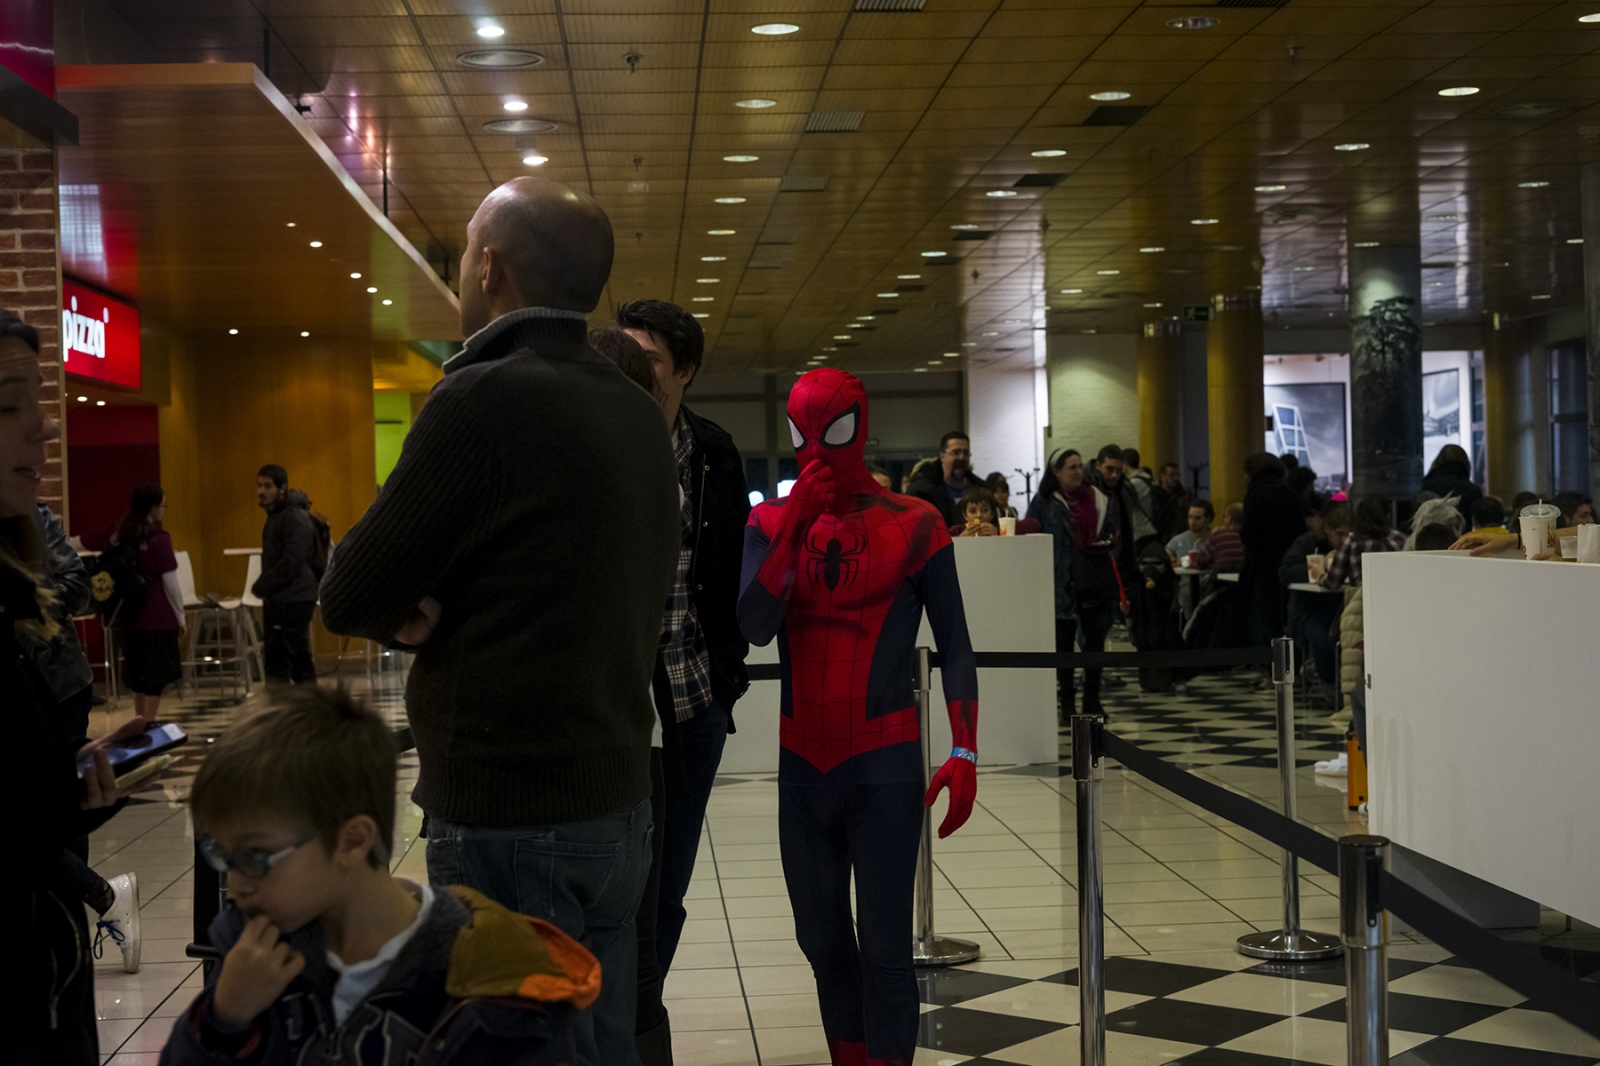 Heroes For A Day -  Spiderman is waiting for a whopper at Burguer King....